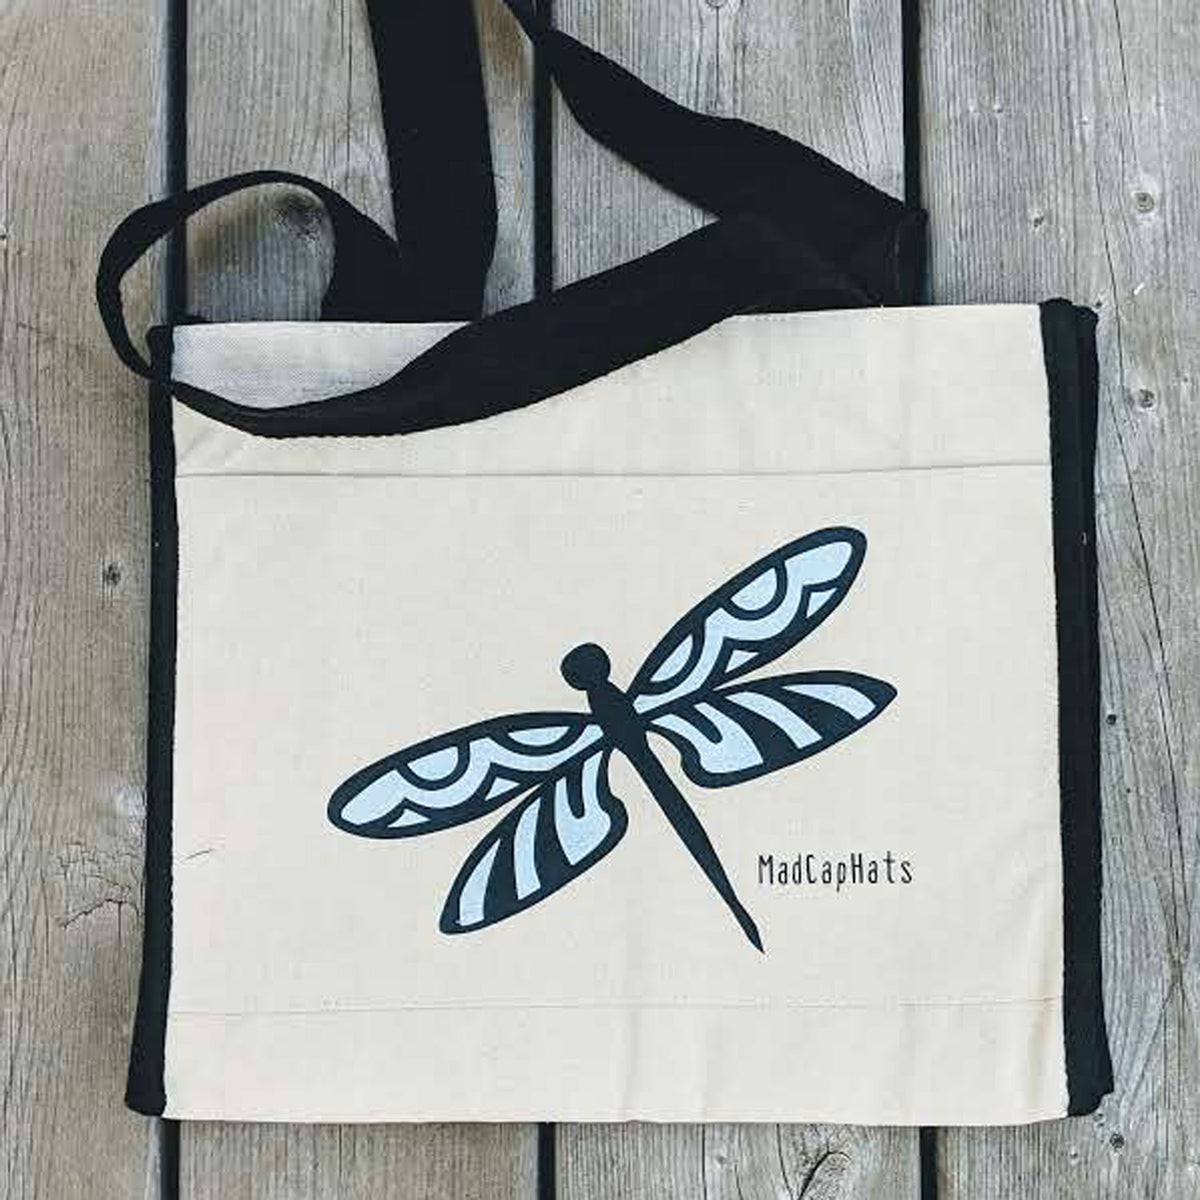 Dragonfly Cotton Canvas Tote Bag